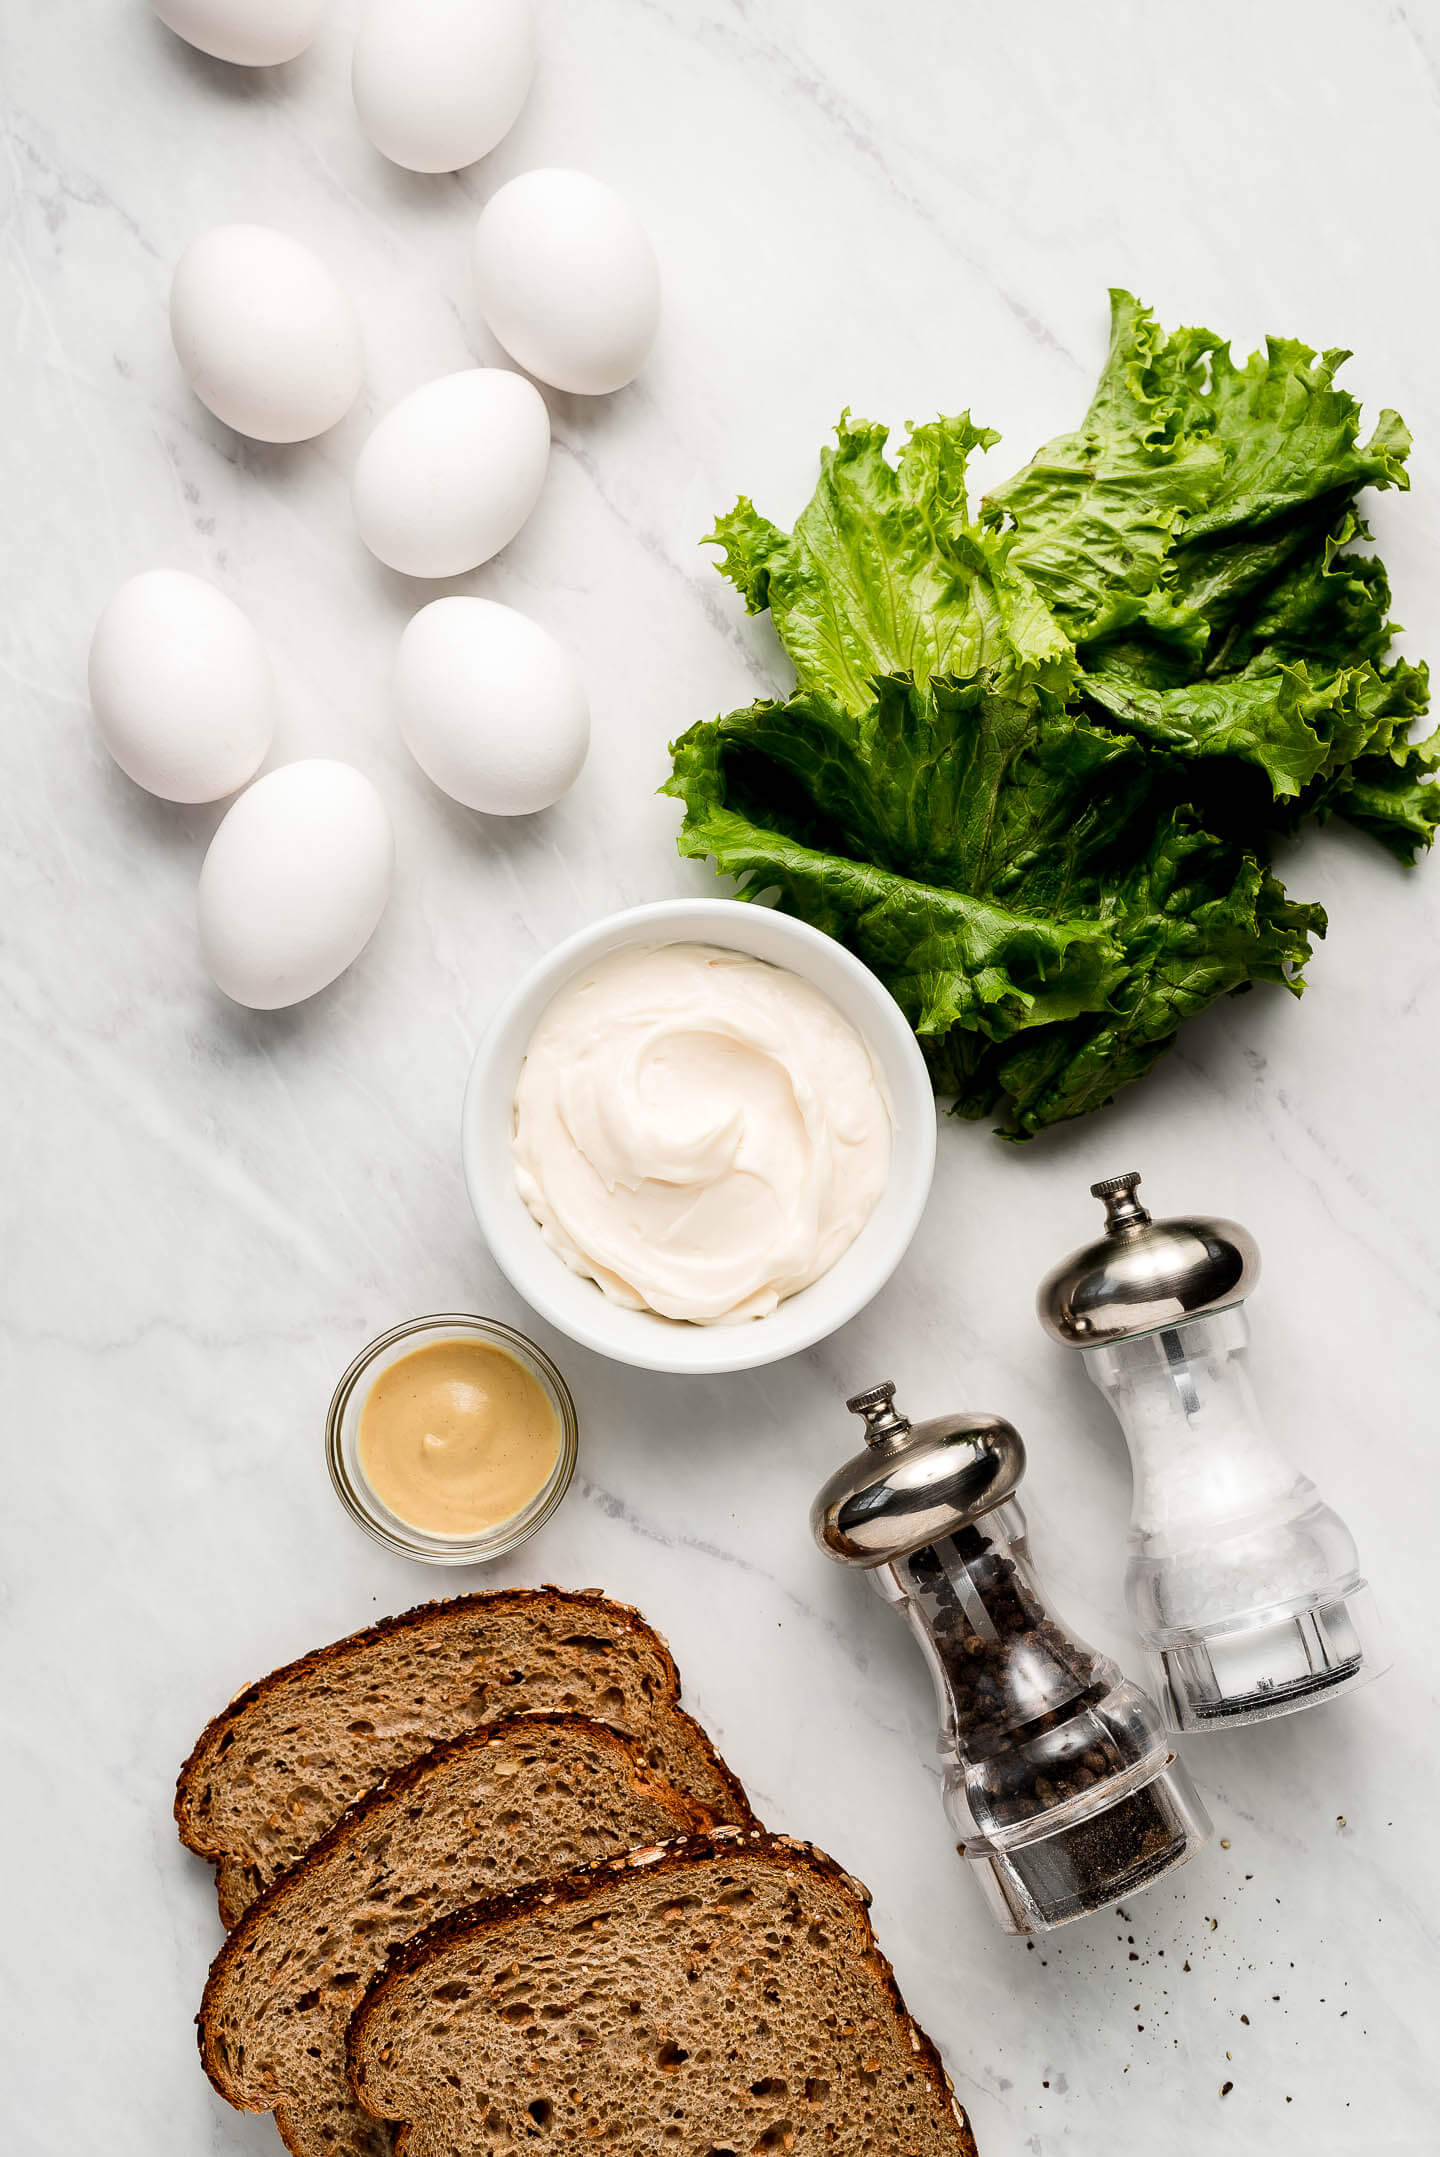 Ingredients on a marble surface- eggs, lettuce, mayo, mustard, bread, and salt & pepper.